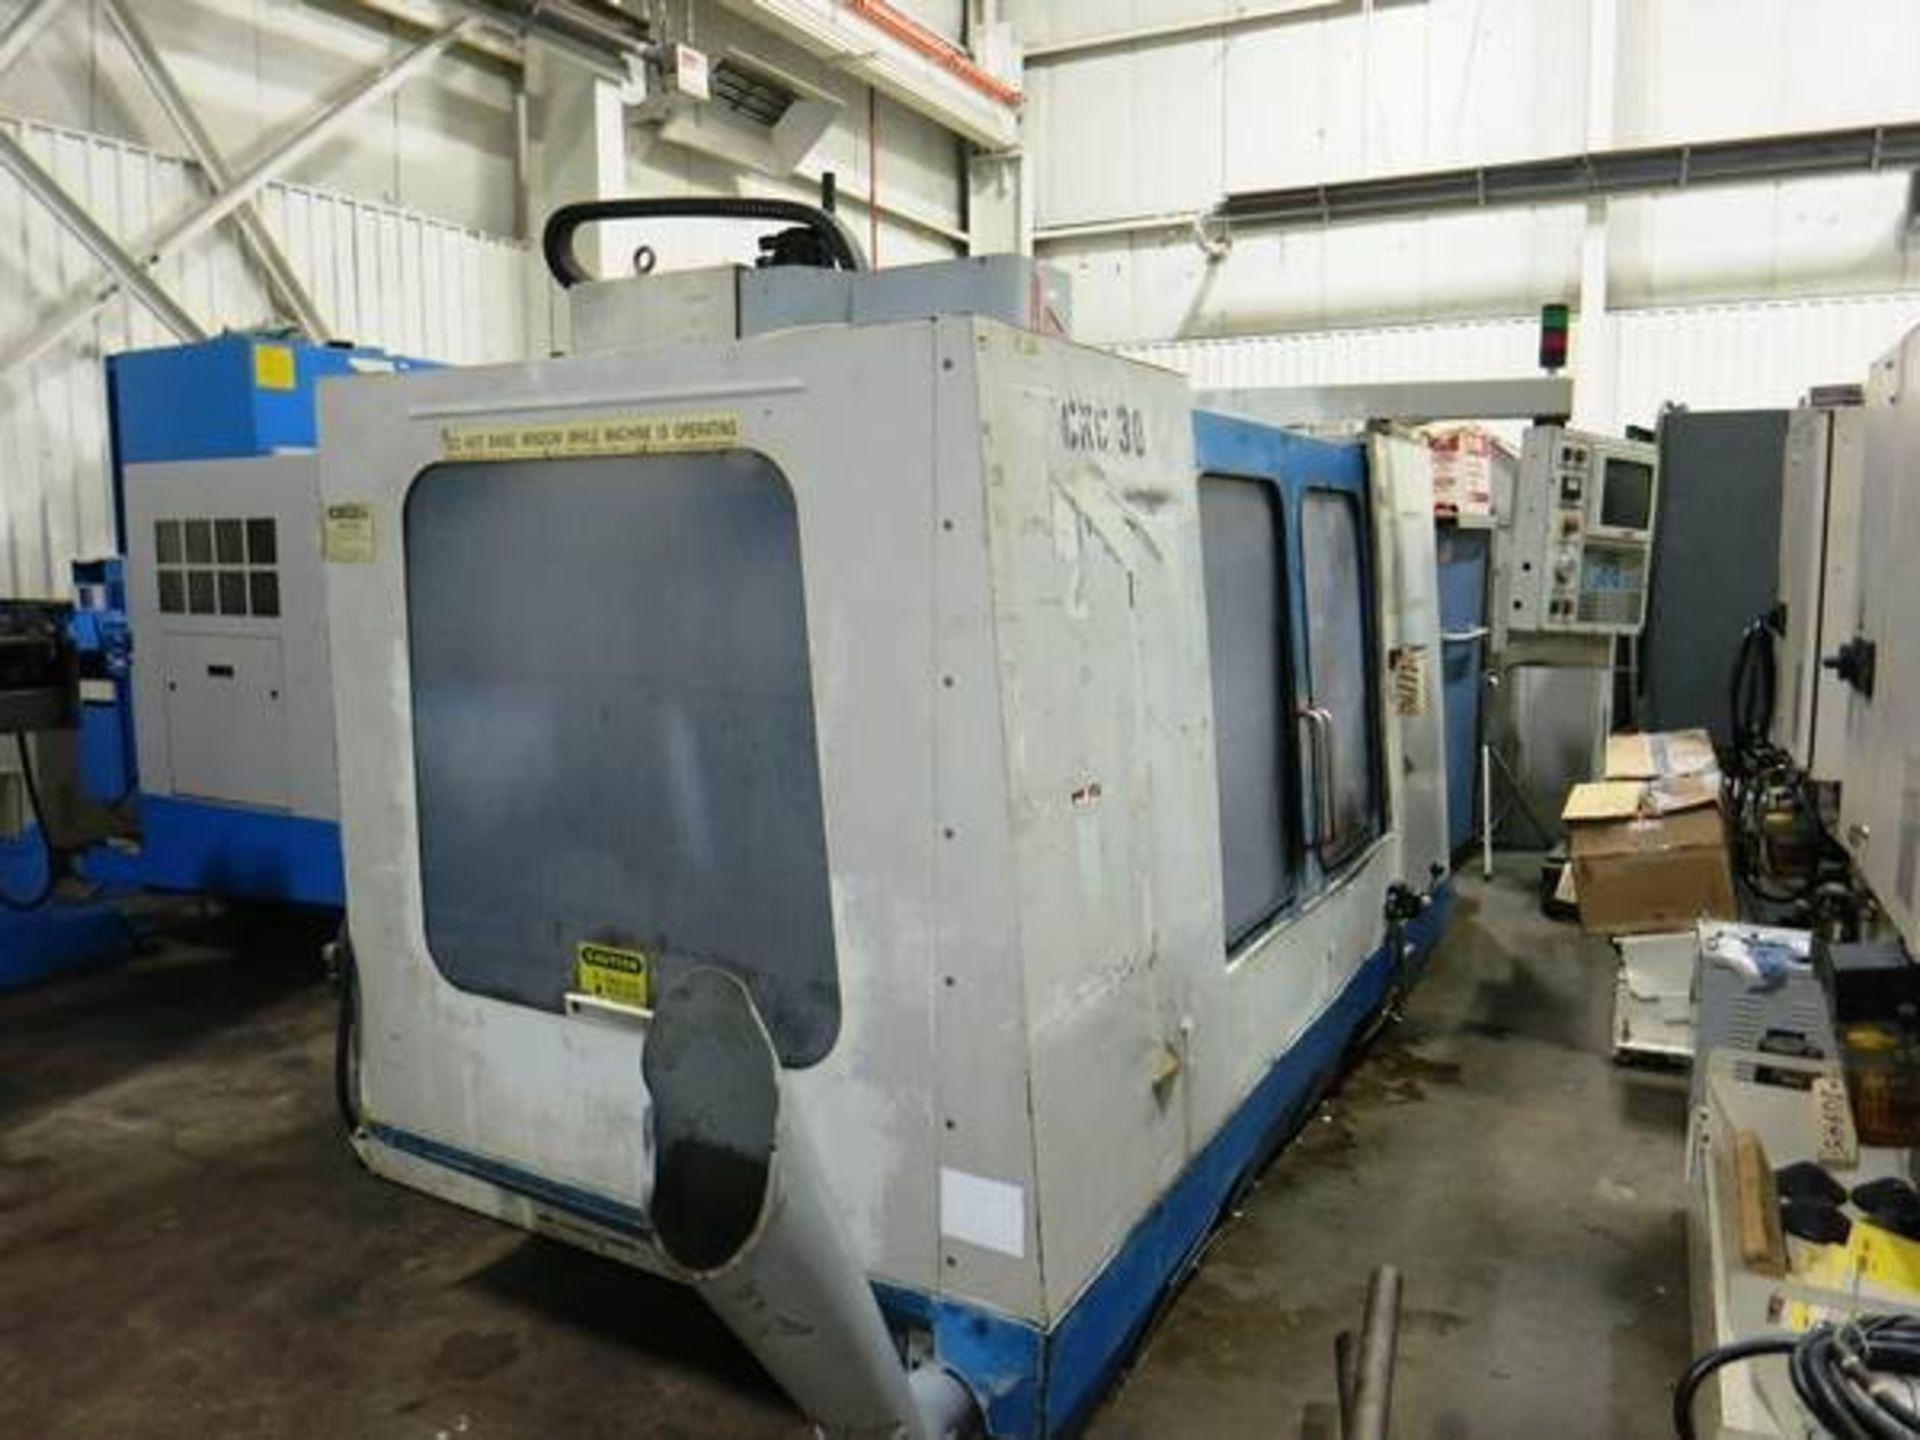 HAAS VF-3 4-AXIS CNC VERTICAL MACHINING CENTER, S/N 14877,  NEW 1998 - Image 7 of 7